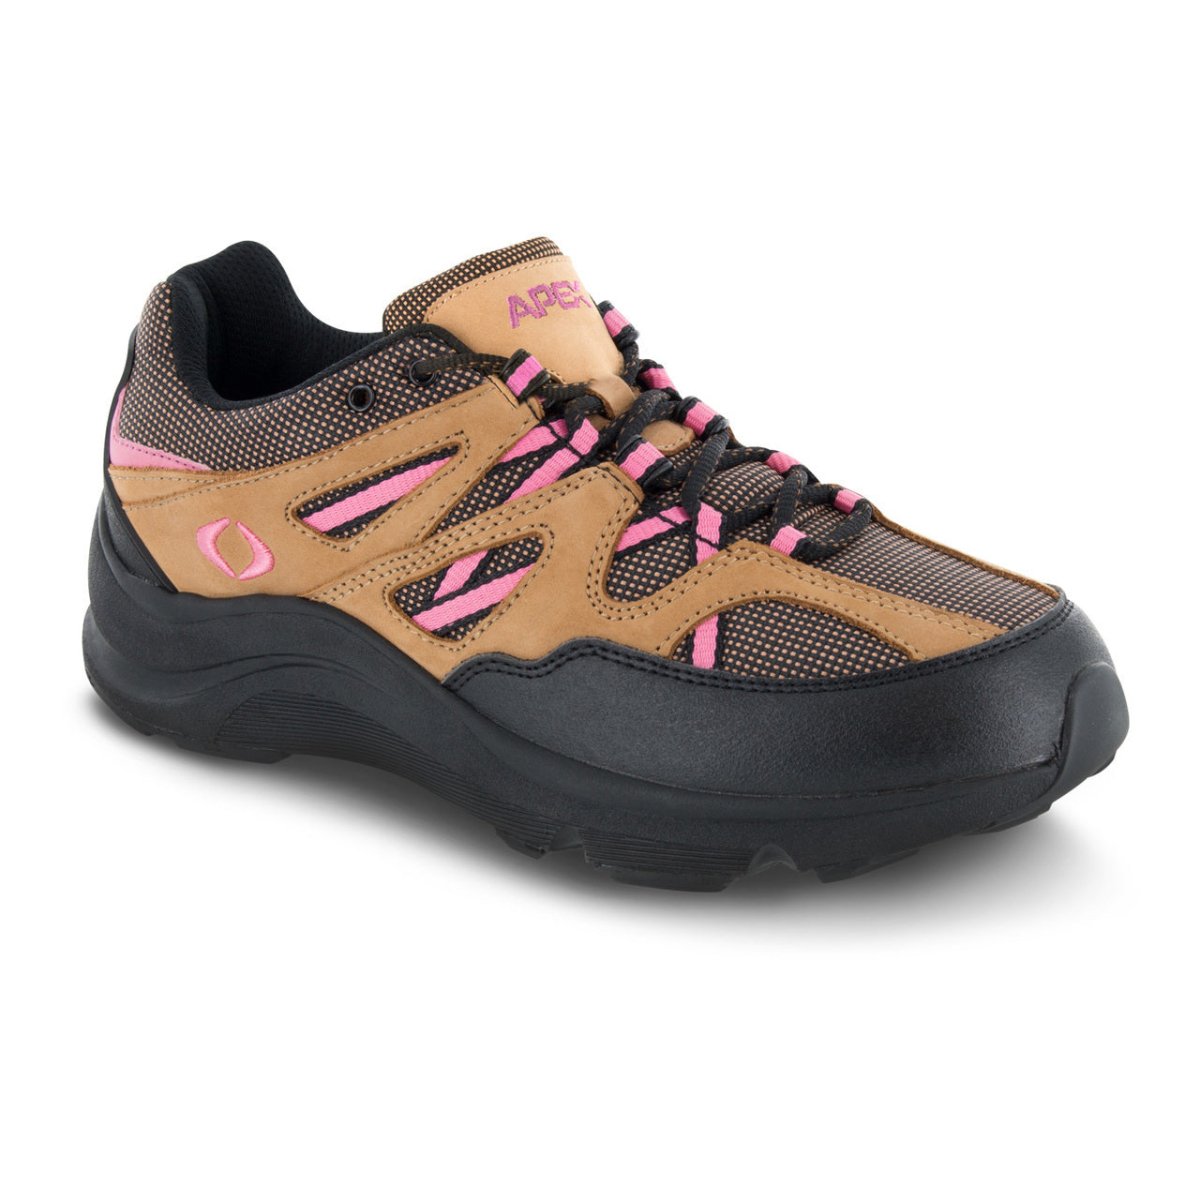 APEX V752 SIERRA TRAIL RUN WOMEN'S ACTIVE SHOE IN BROWN/PINK - TLW Shoes